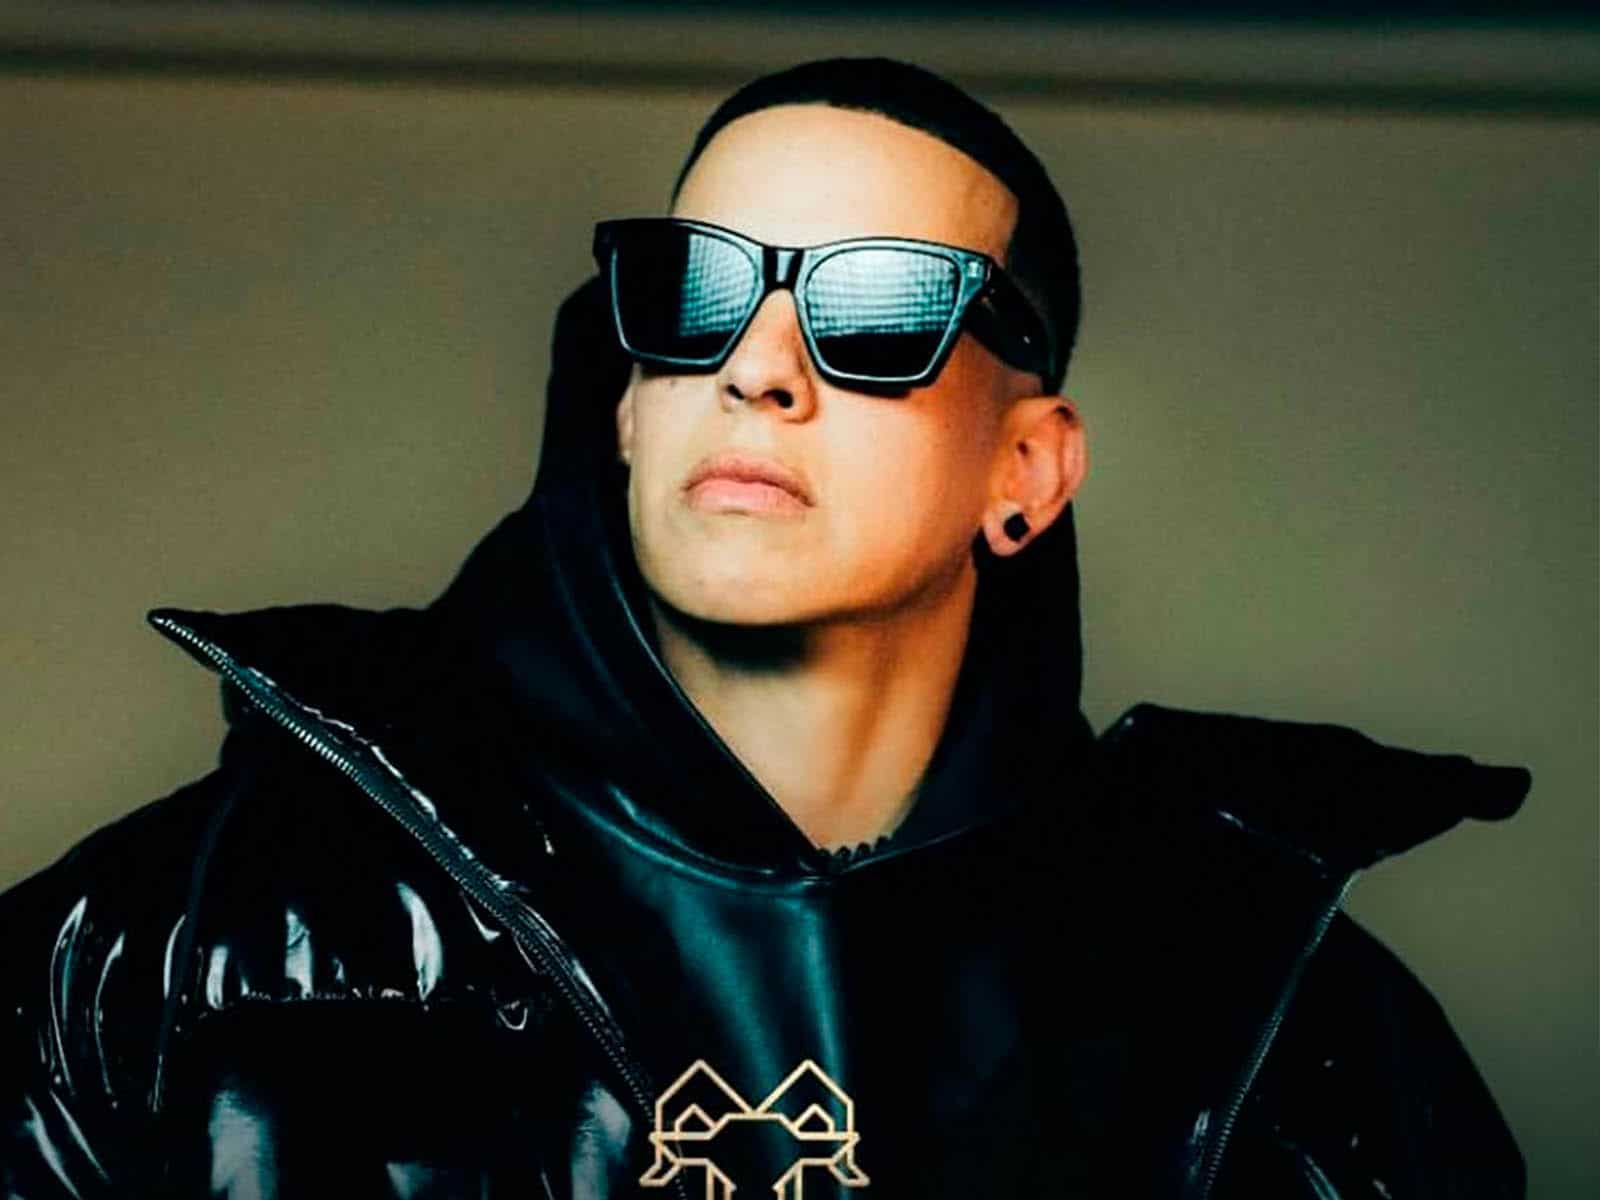 Say goodbye to Daddy Yankee at his last concert in Madrid